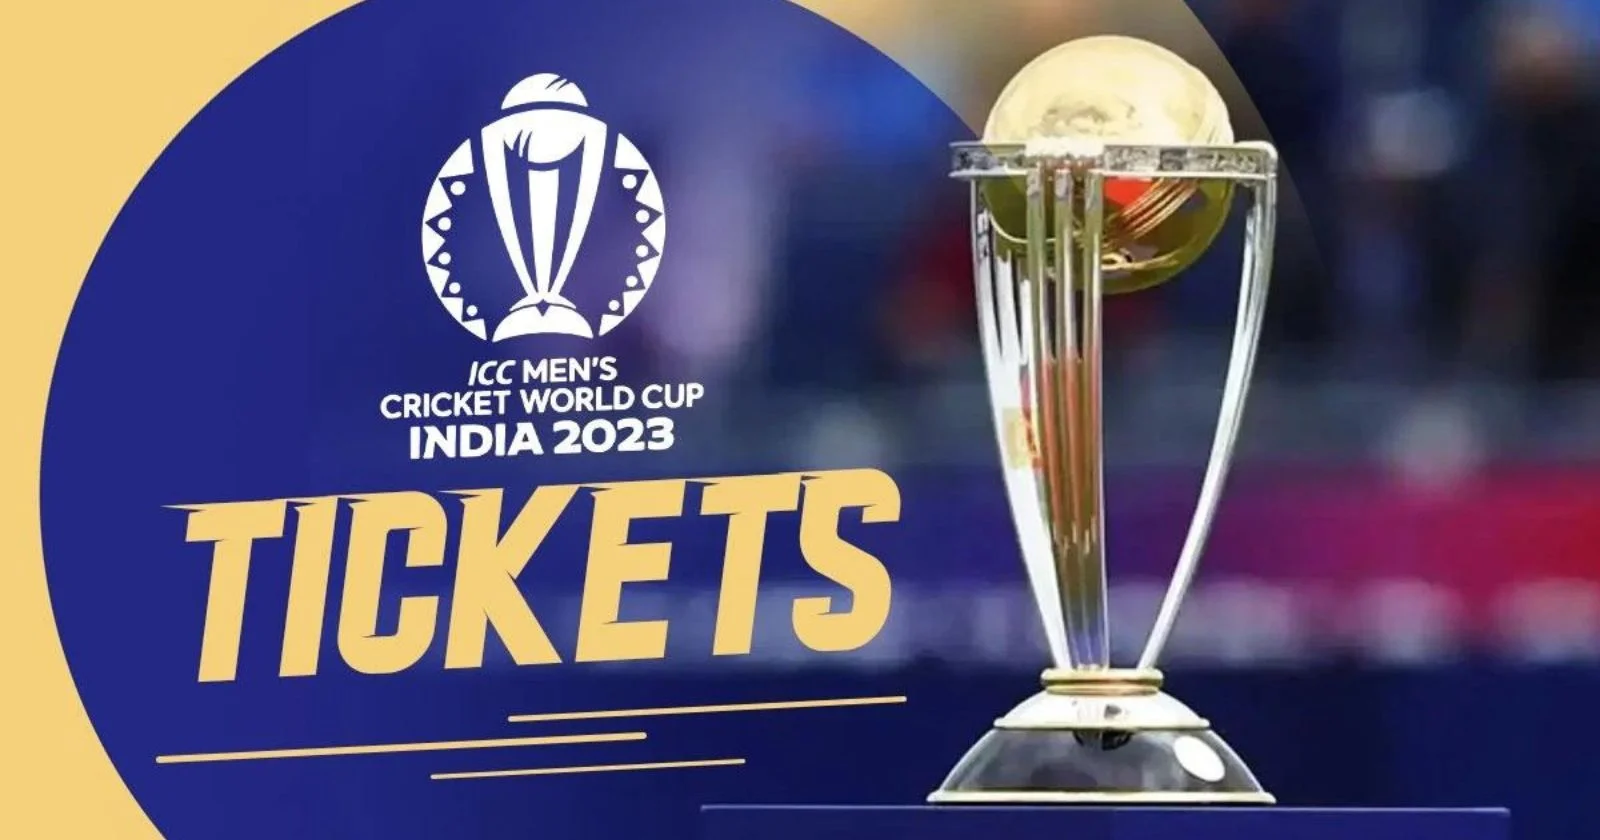 Cricket World Cup 2023 Tickets Will Be Available From Thursday